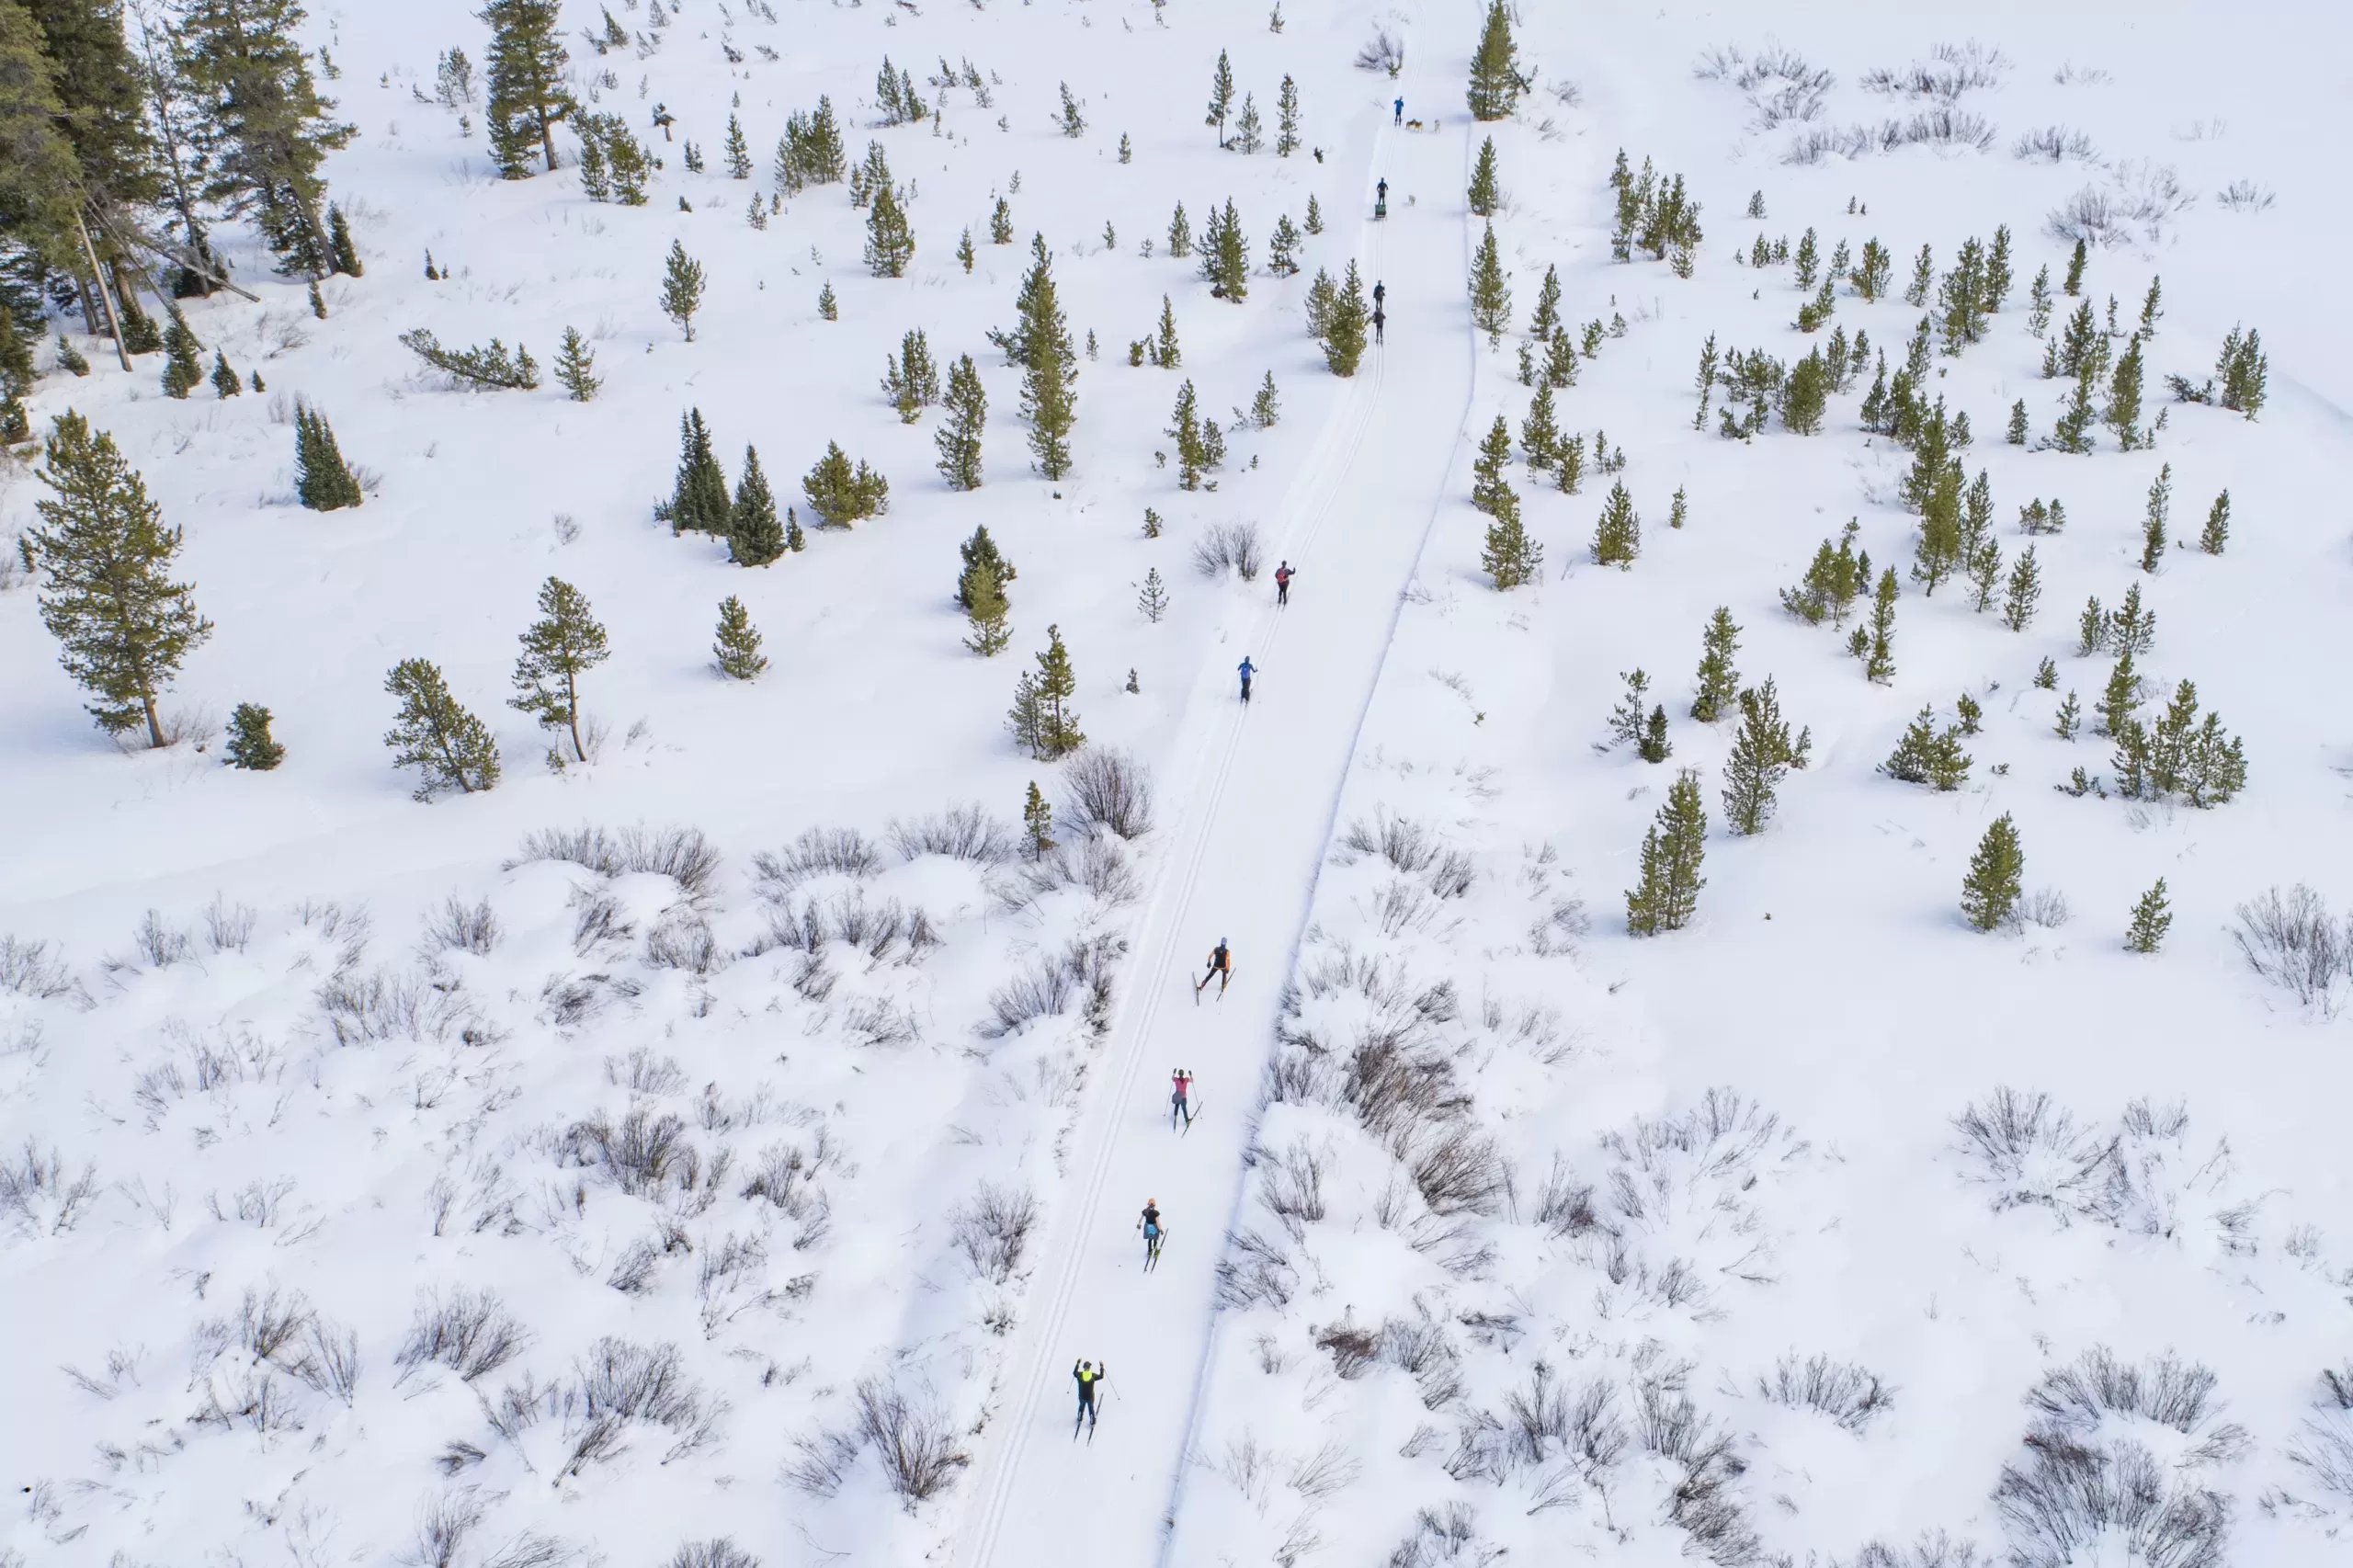 An aerial view of six people skiing on a cross-country ski trail